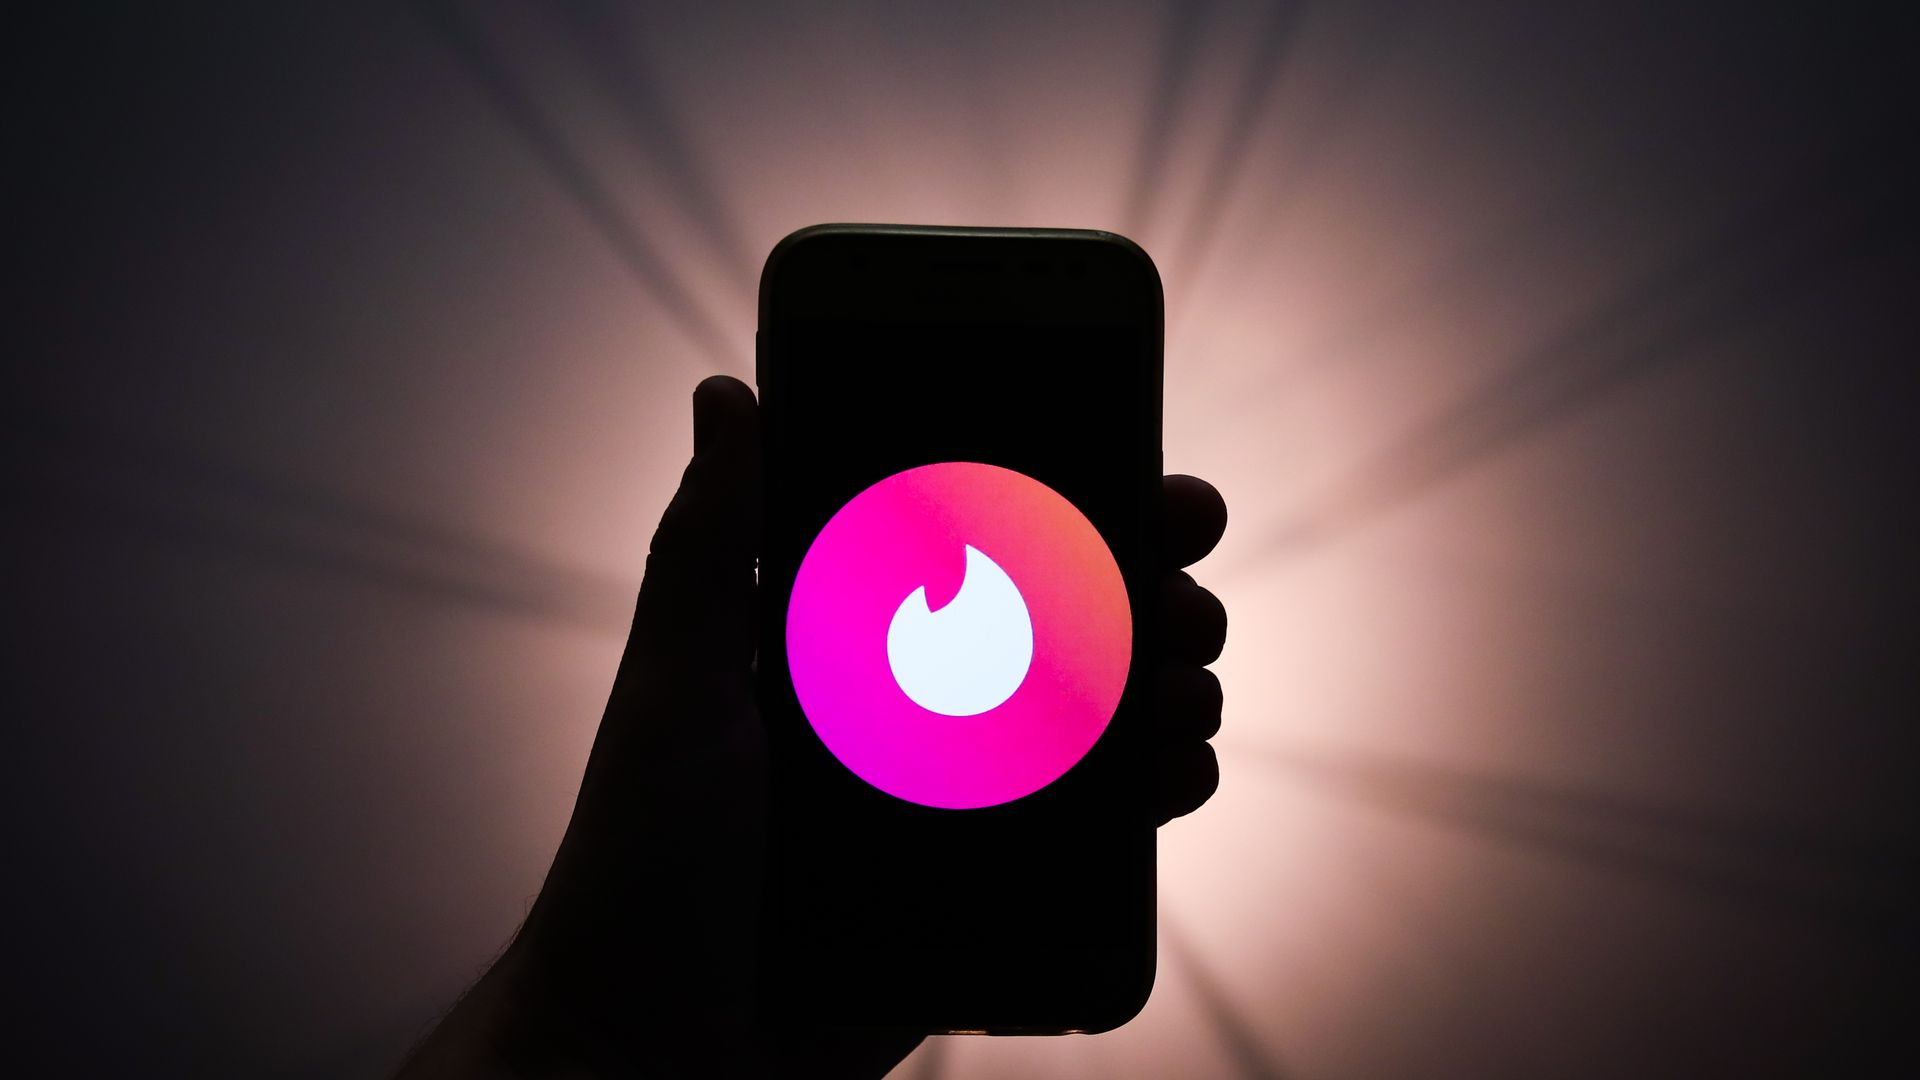 Photo illustration of a Tinder logo displayed on a phone screen.